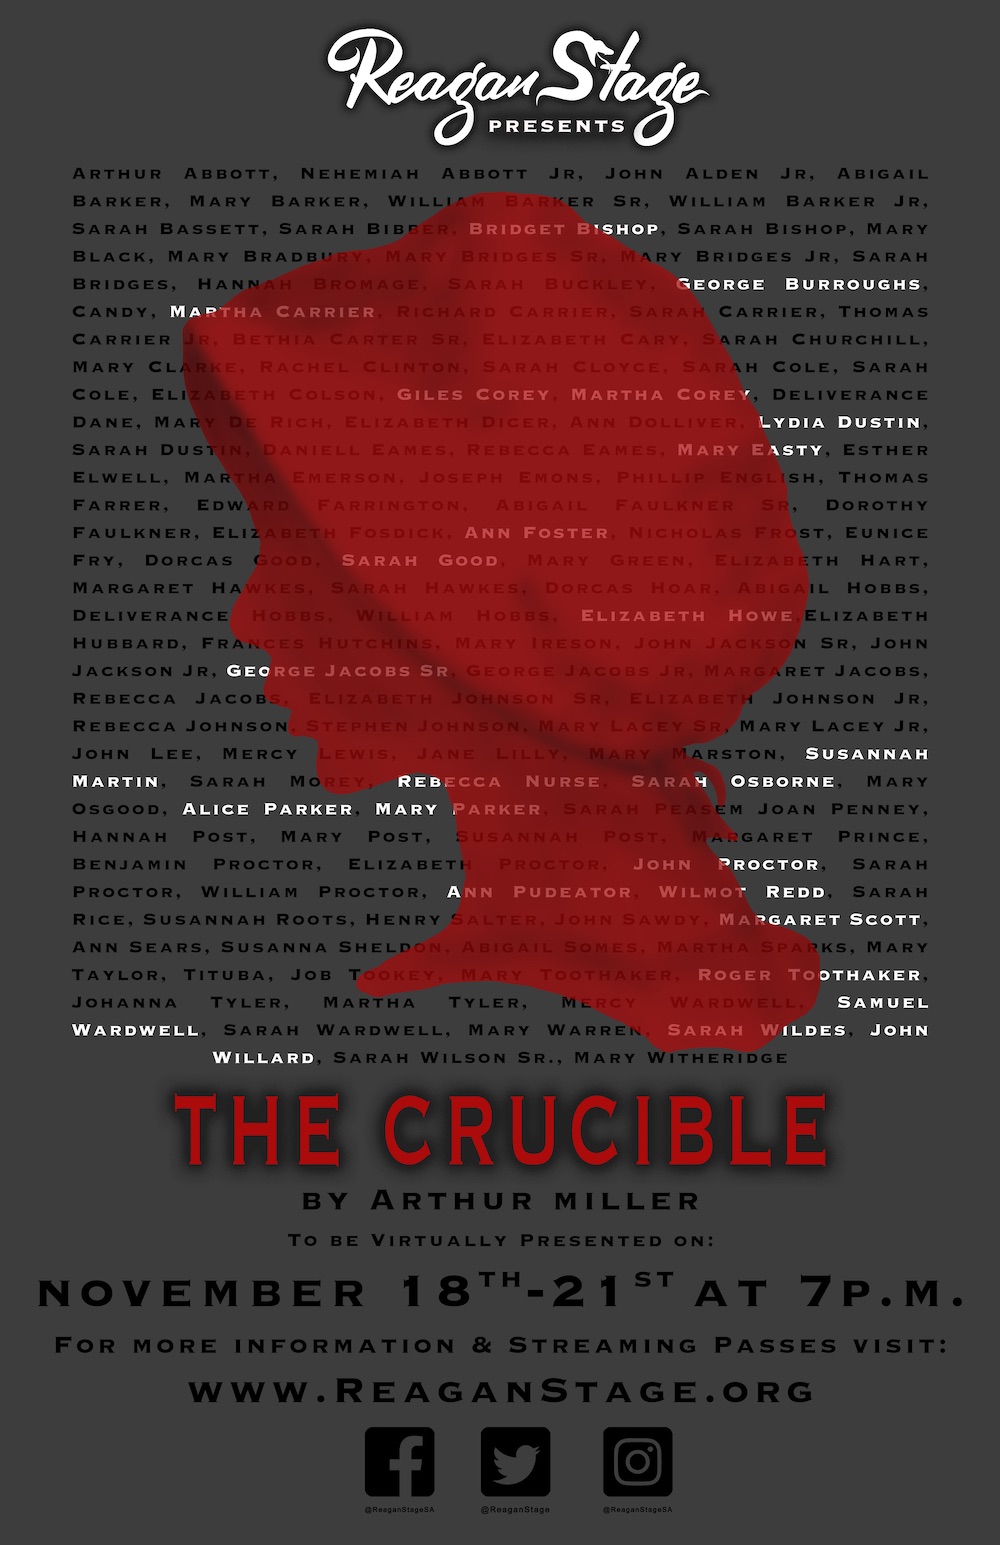 The Crucible by Reagan Stage